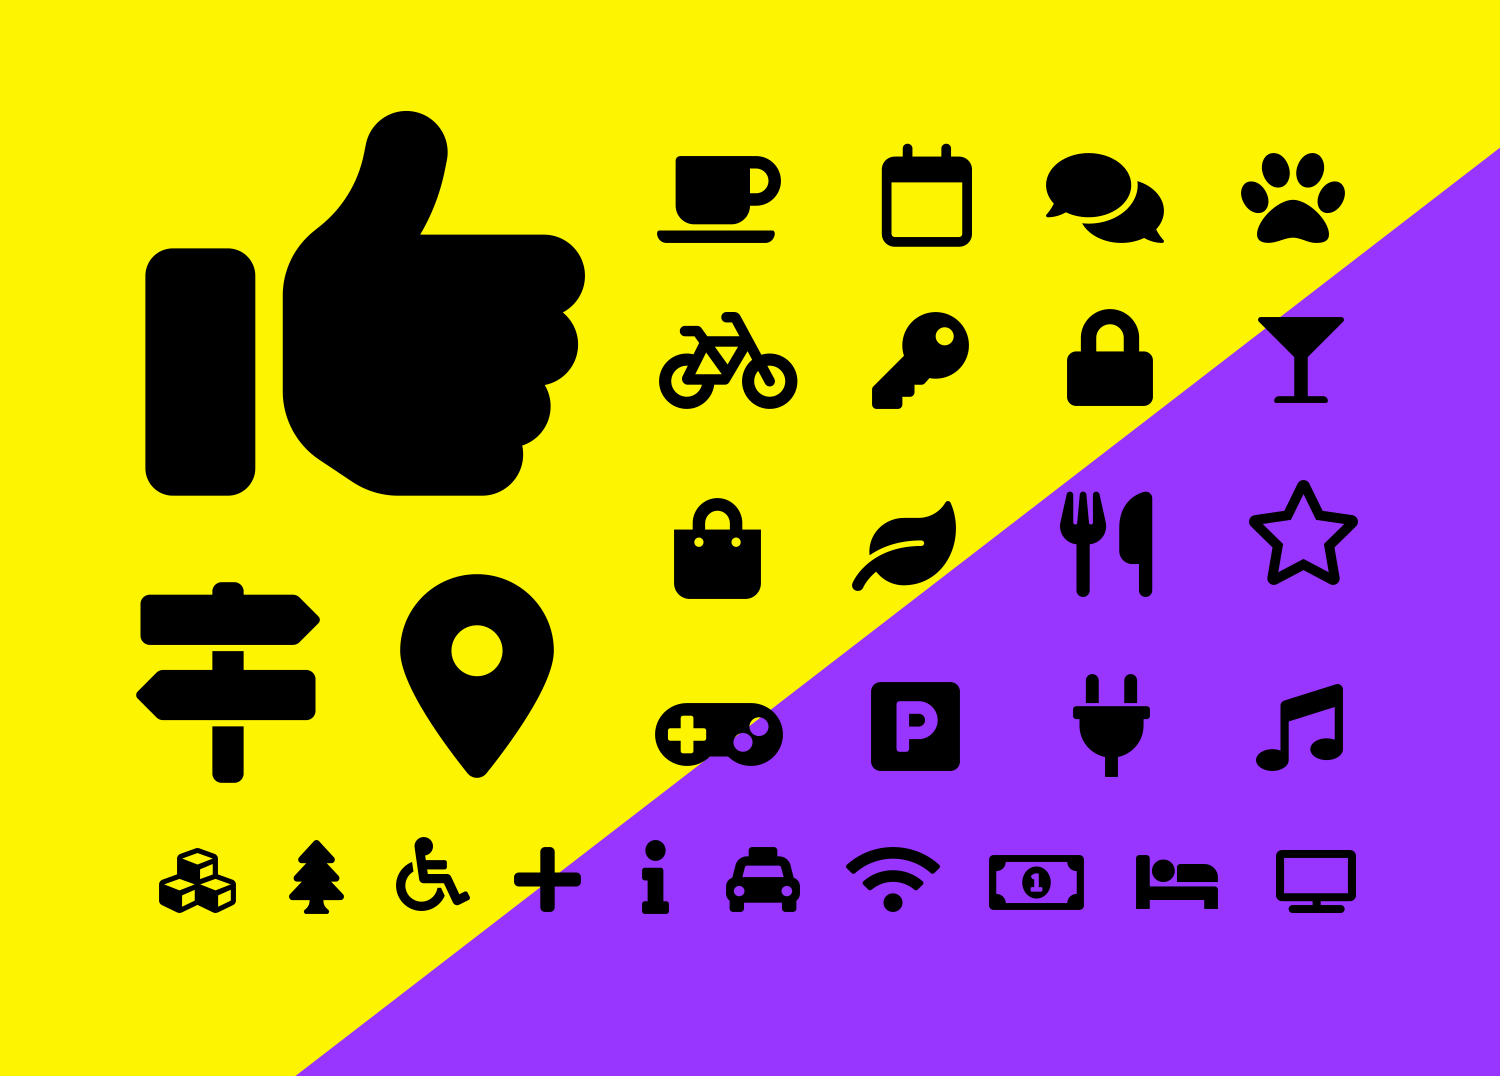 Font Awesome icon set for design